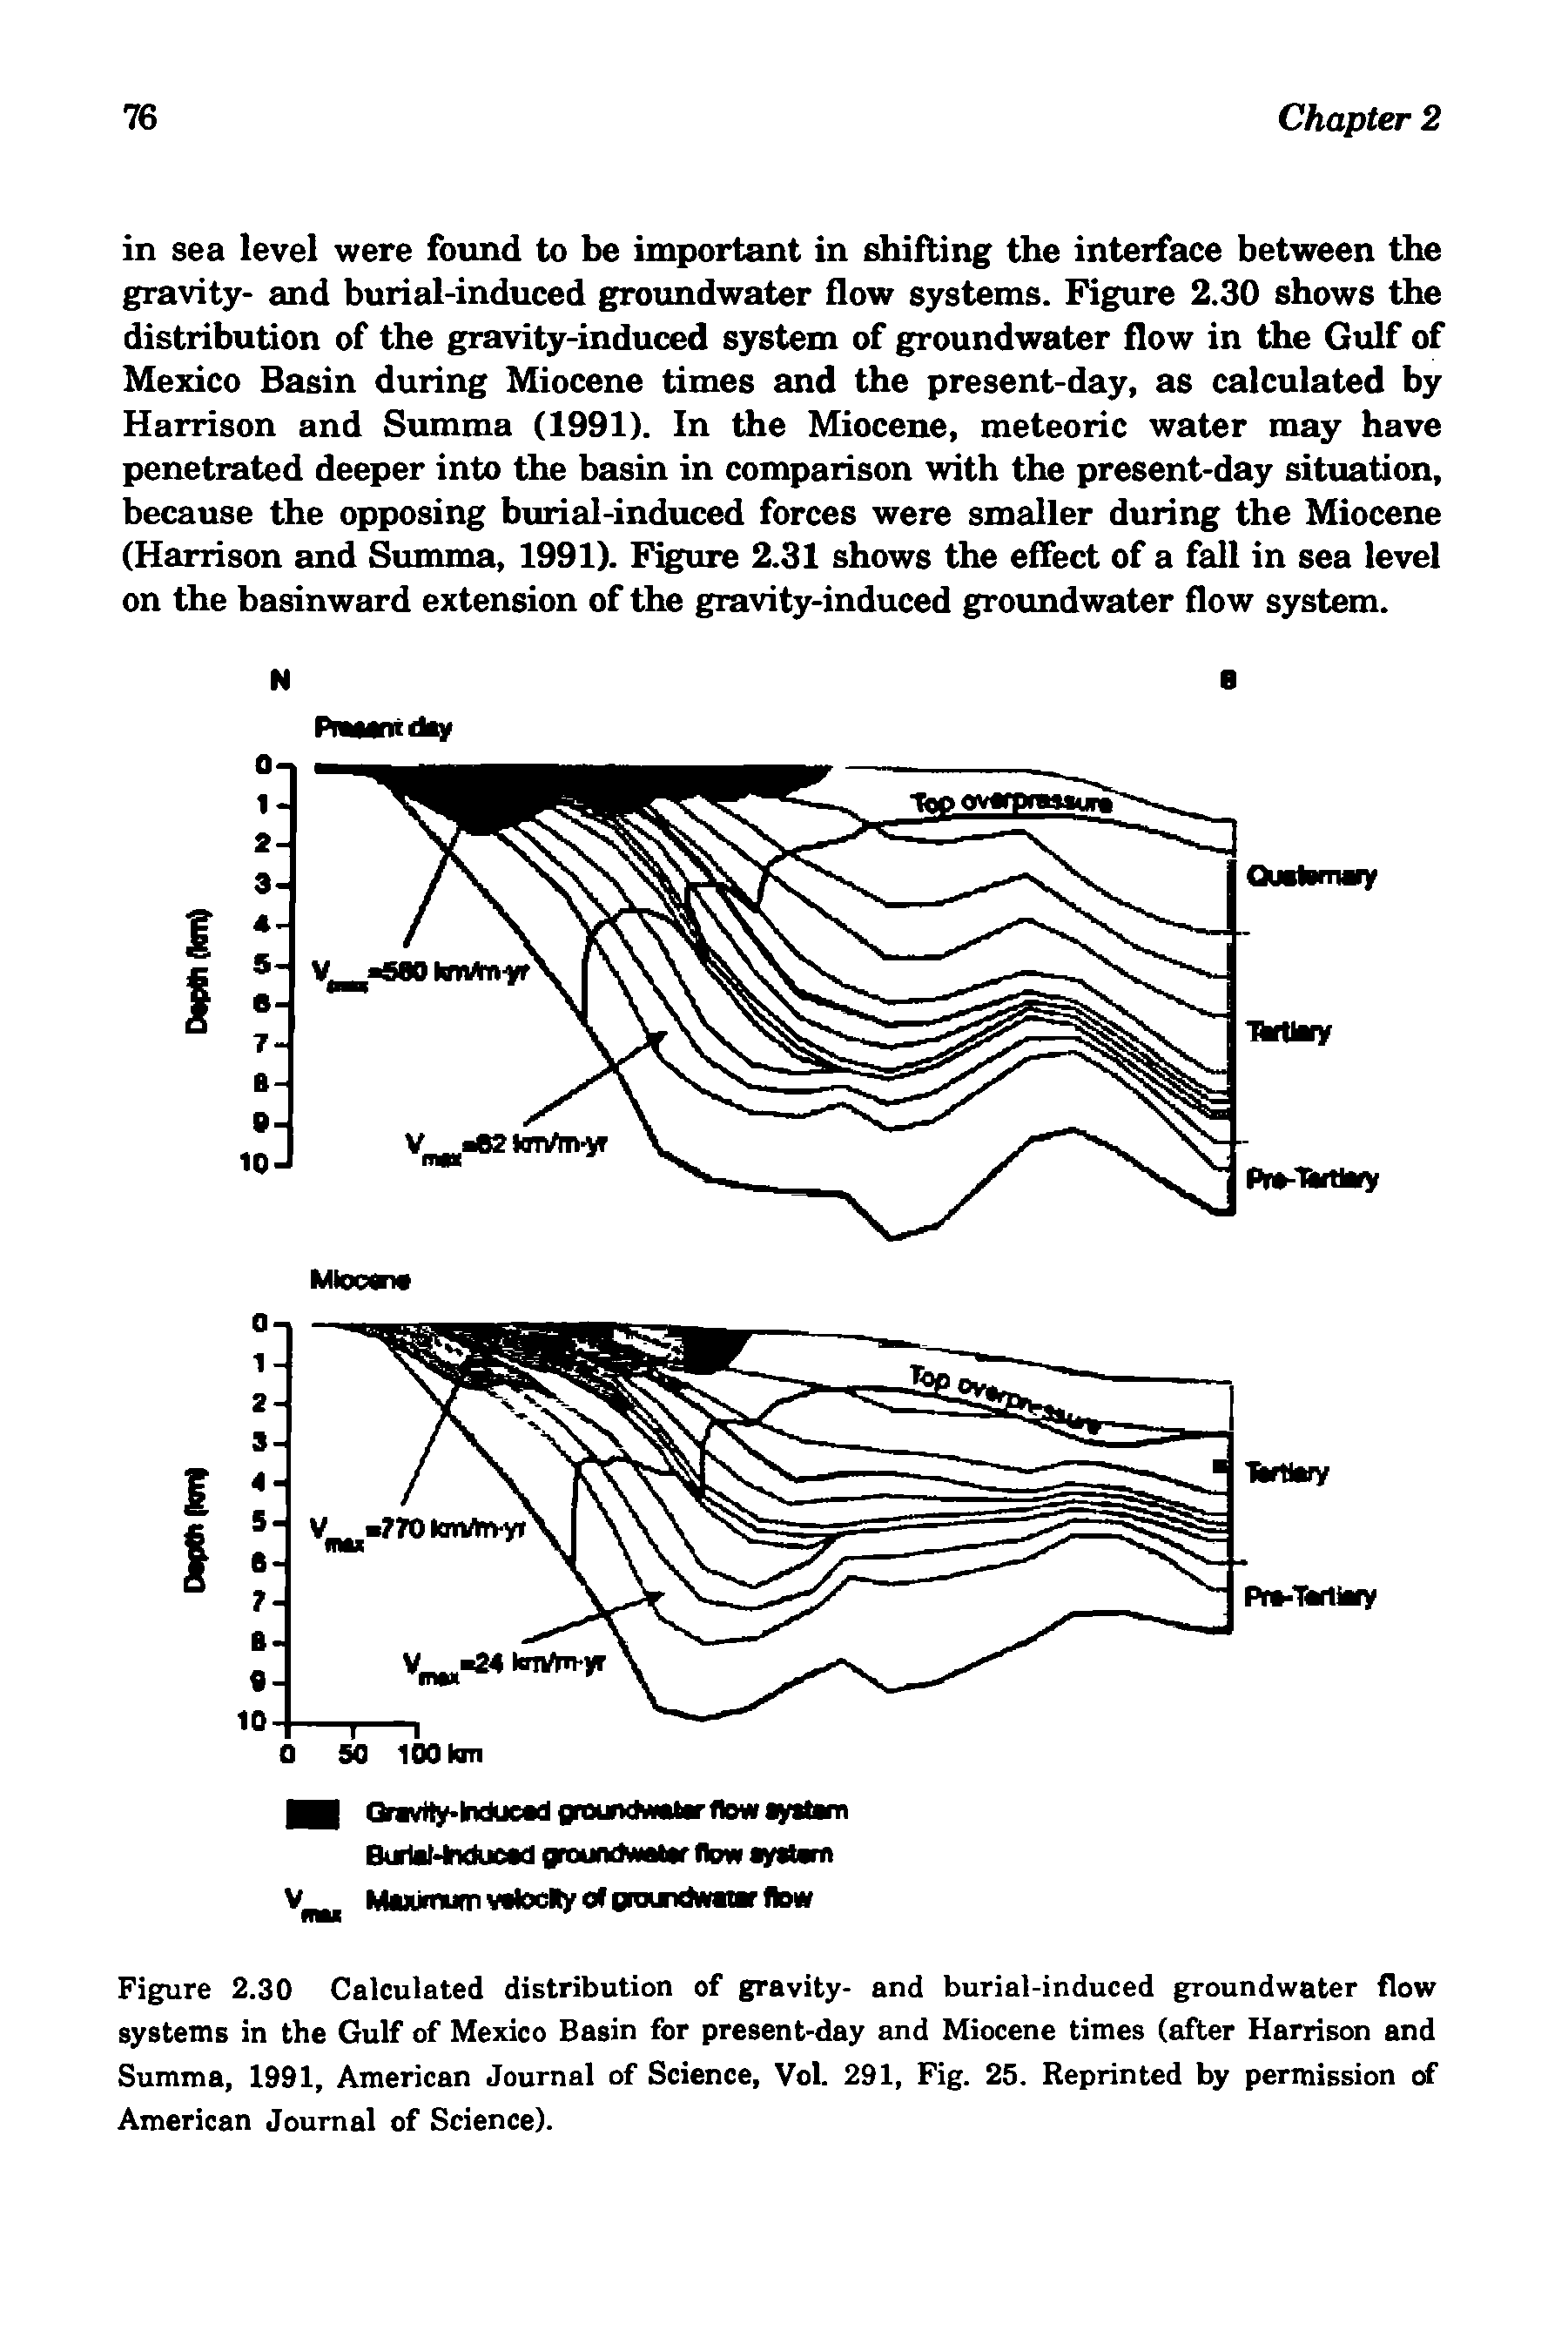 Figure 2.30 Calculated distribution of gravity- and burial-induced groundwater flow systems in the Gulf of Mexico Basin for present-day and Miocene times (after Harrison and Summa, 1991, American Journal of Science, Vol. 291, Fig. 25. Reprinted by permission of American Journal of Science).